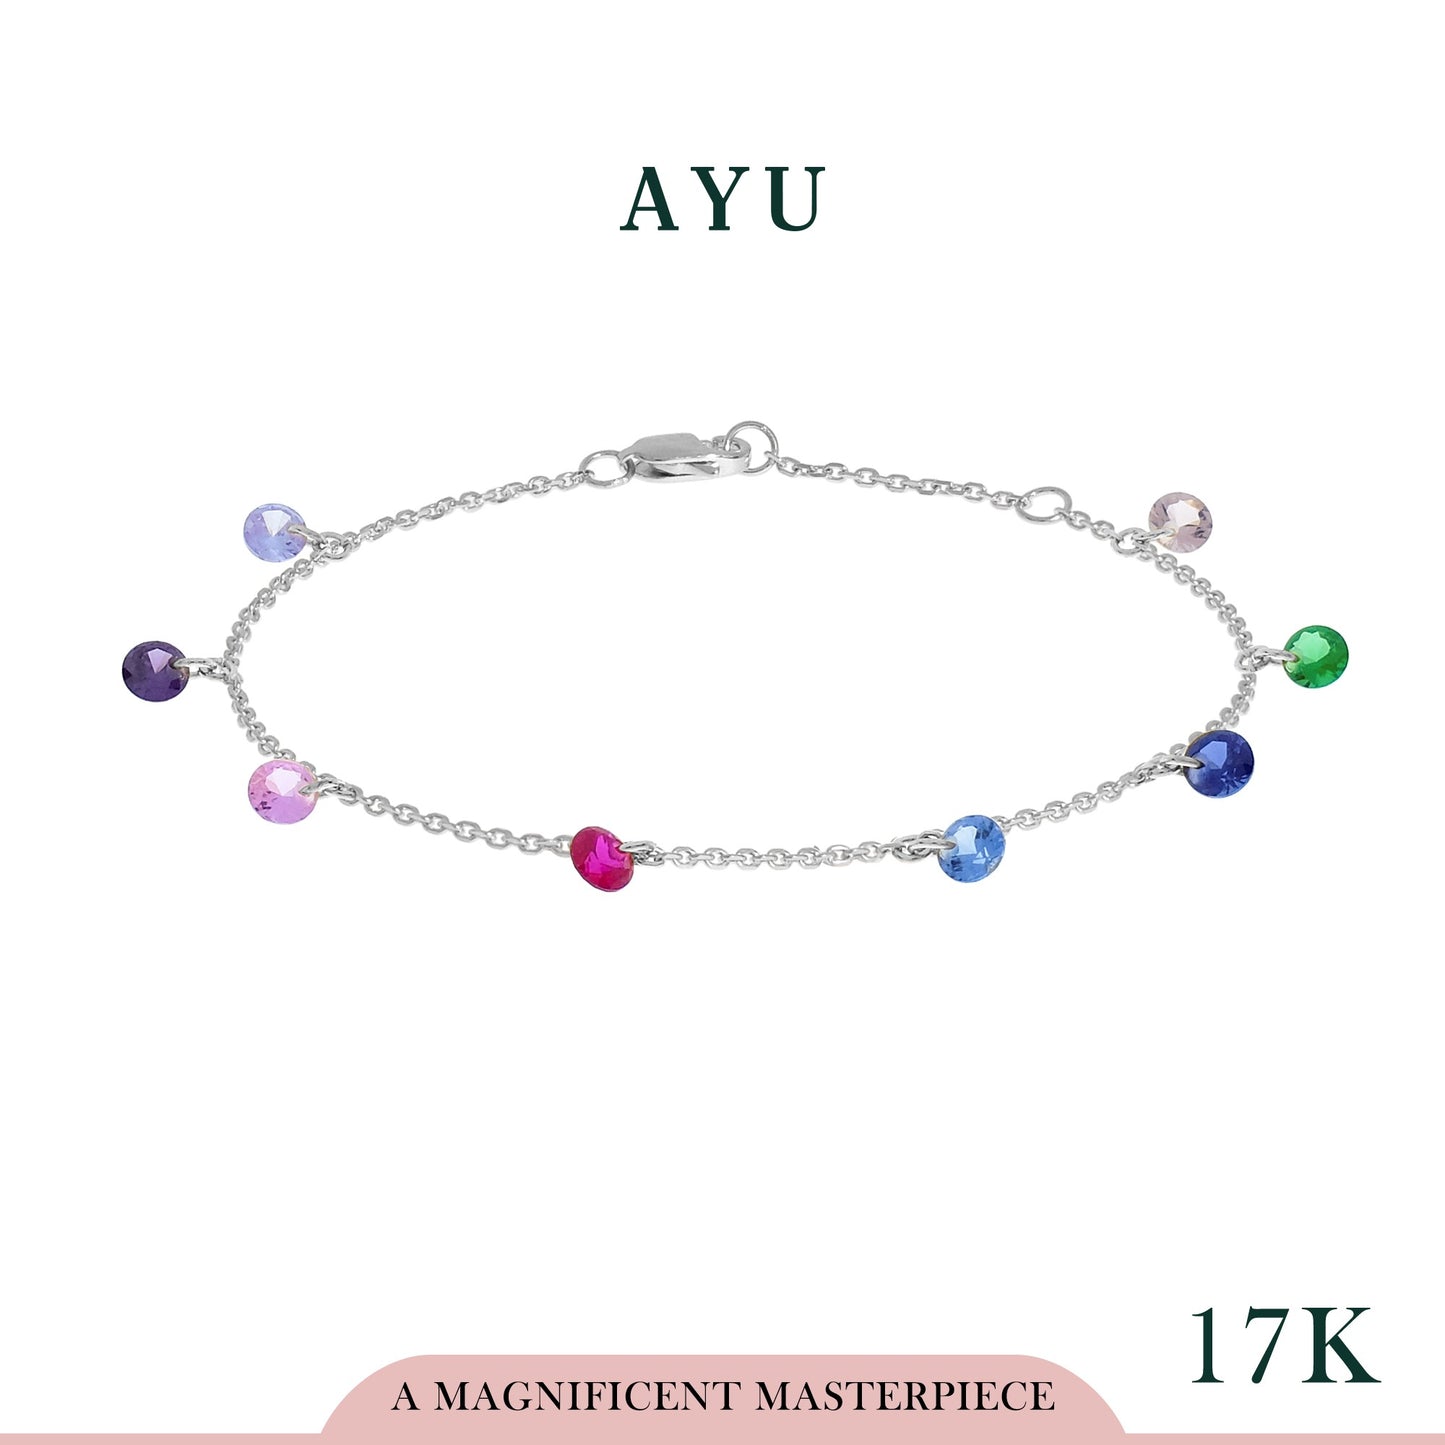 AYU 8 Candy Pop Chain Anklet Rainbow 17k White Gold